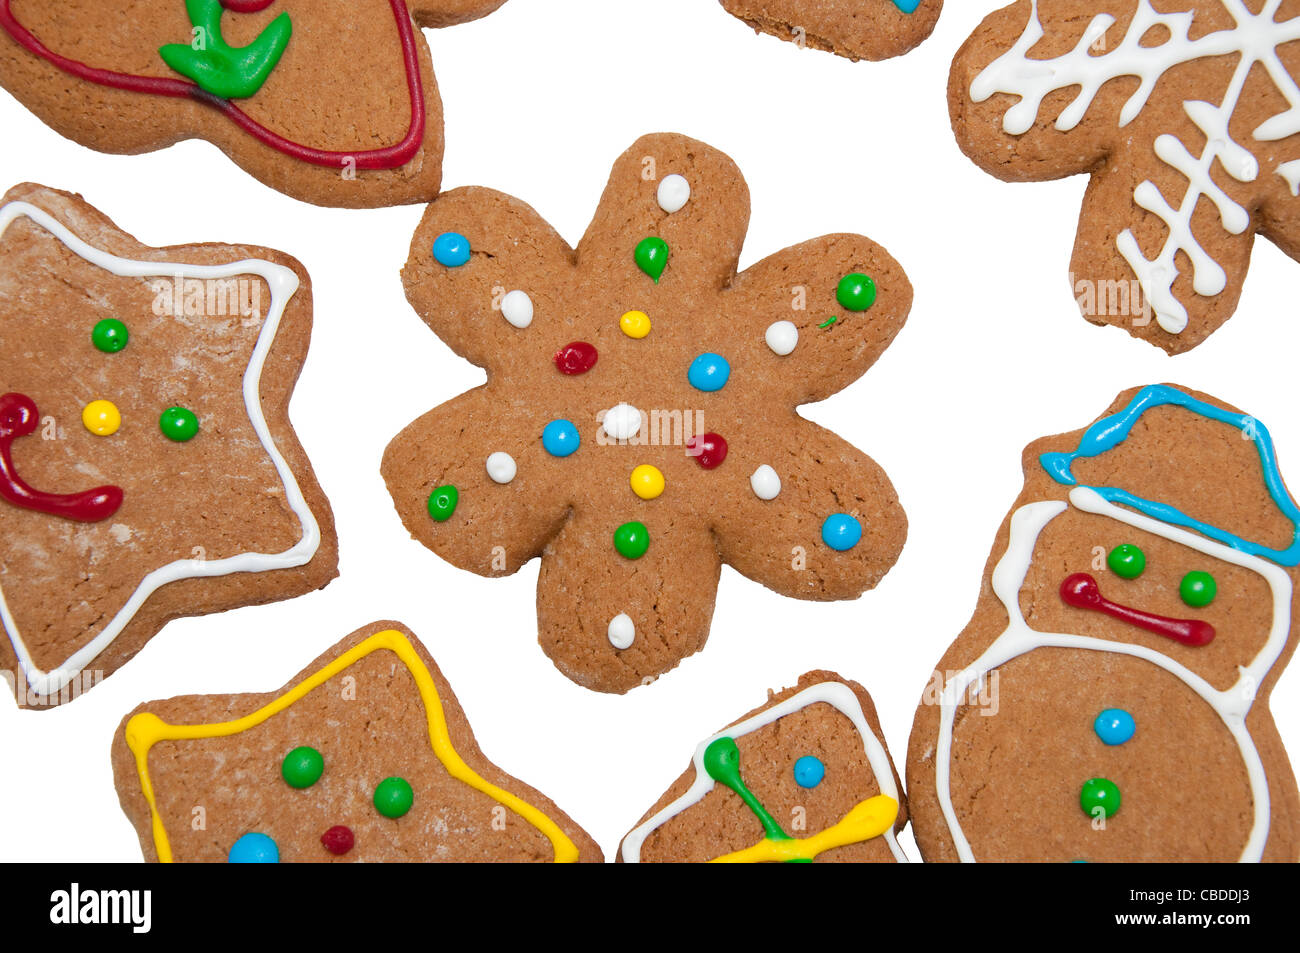 Snowflake gingerbread cookie in the middle of other colorful gingerbread cookies on white background Stock Photo